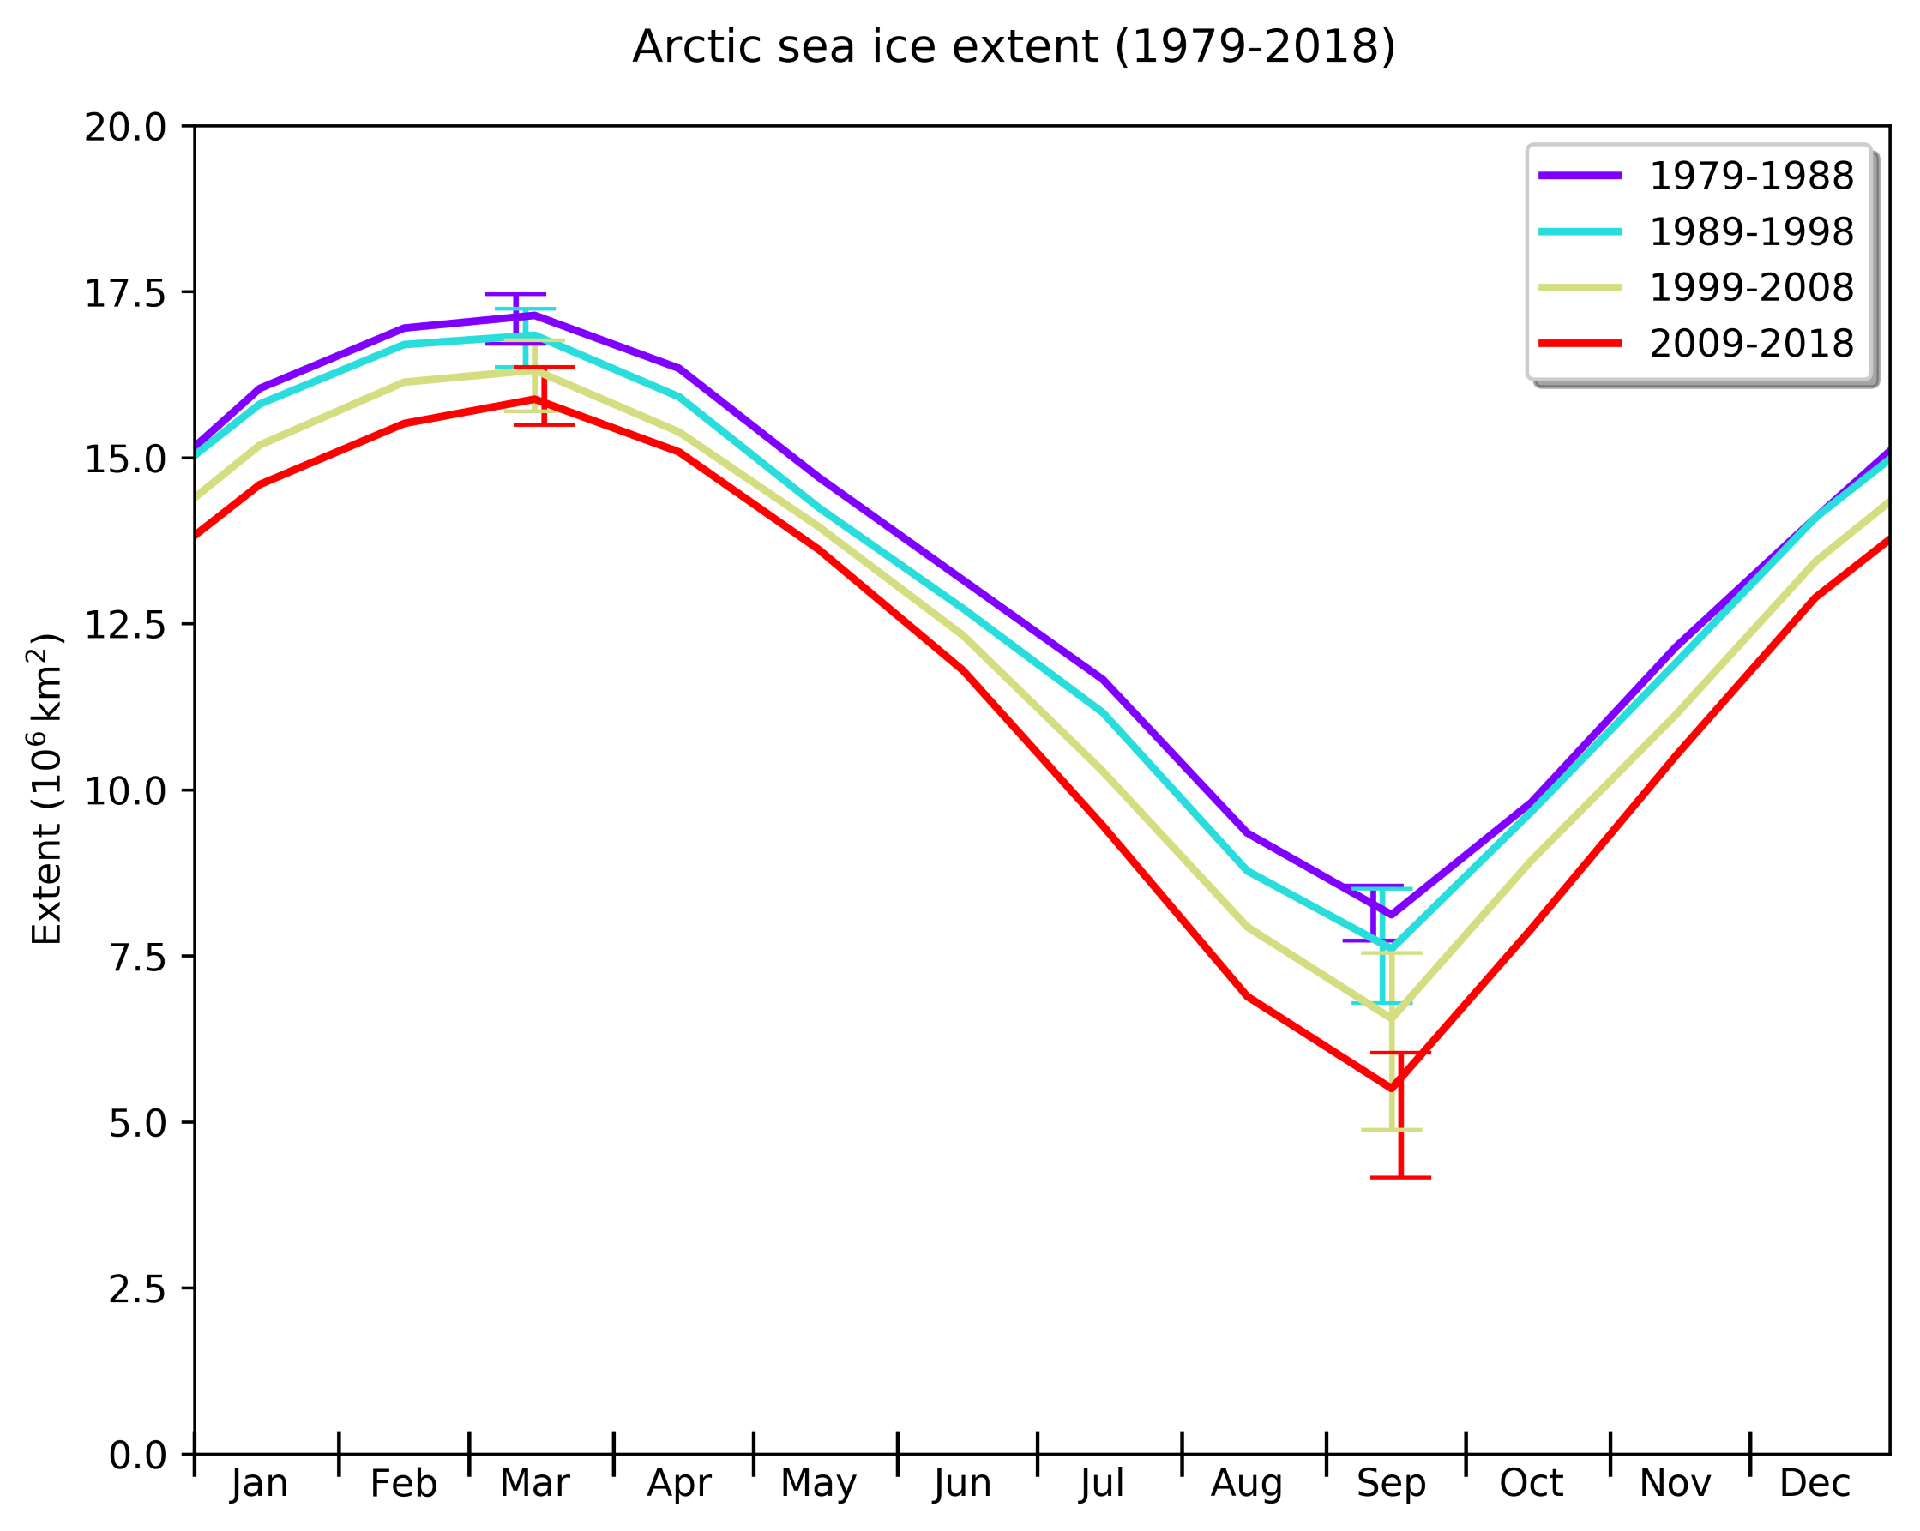 The spatial pattern of September Arctic sea ice extent projected by IPCC AR5 models for the four RCP scenarios over the period 2081-2100.